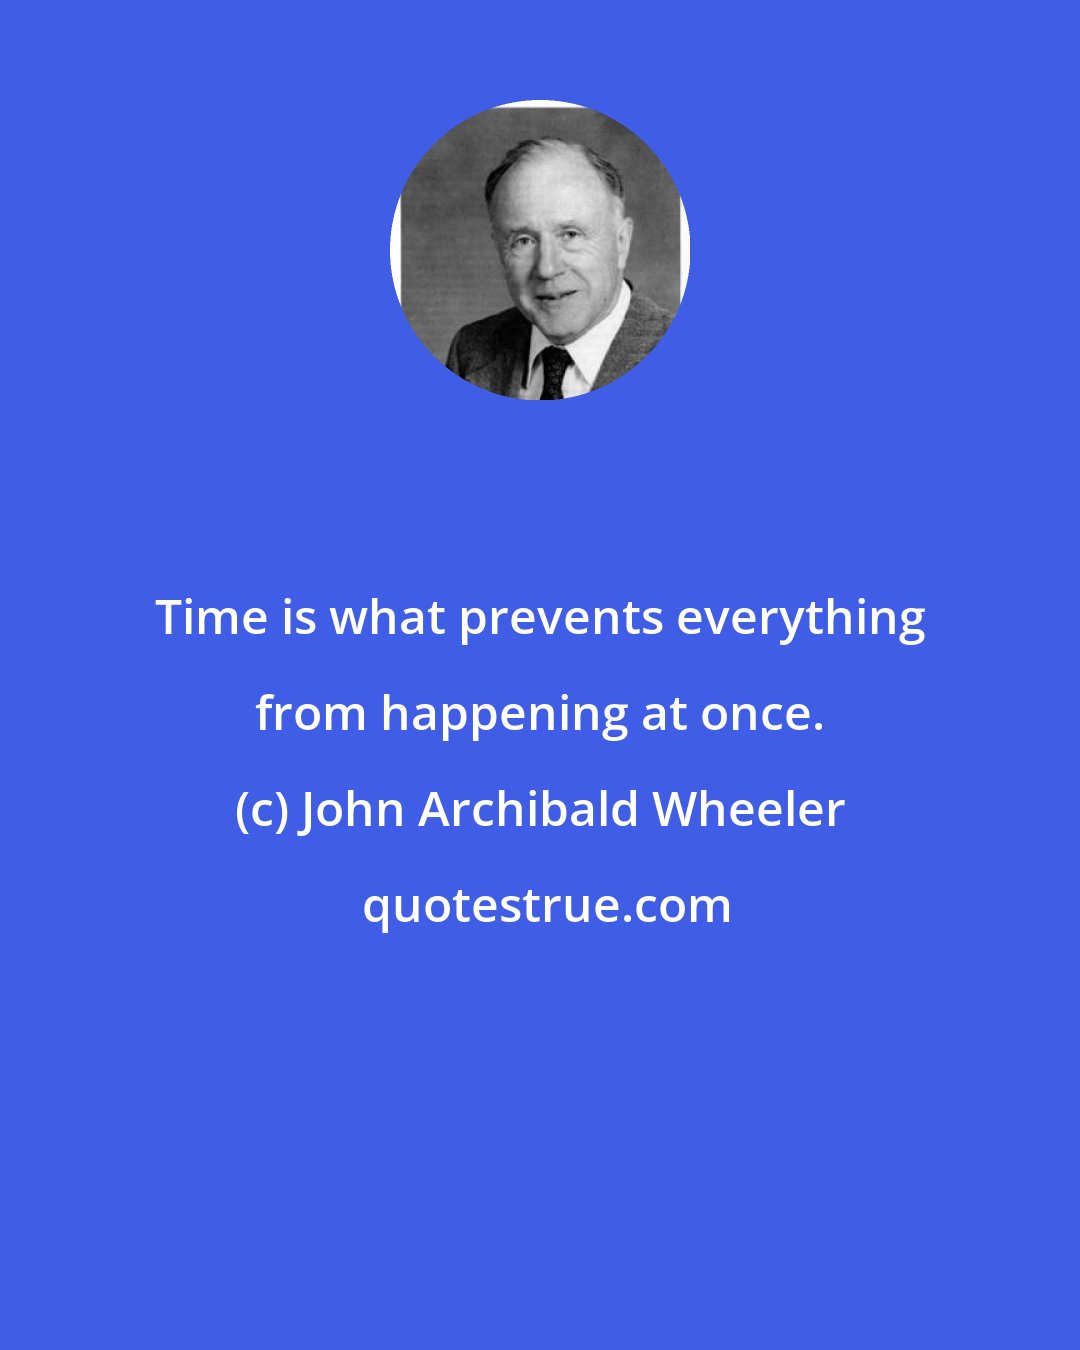 John Archibald Wheeler: Time is what prevents everything from happening at once.